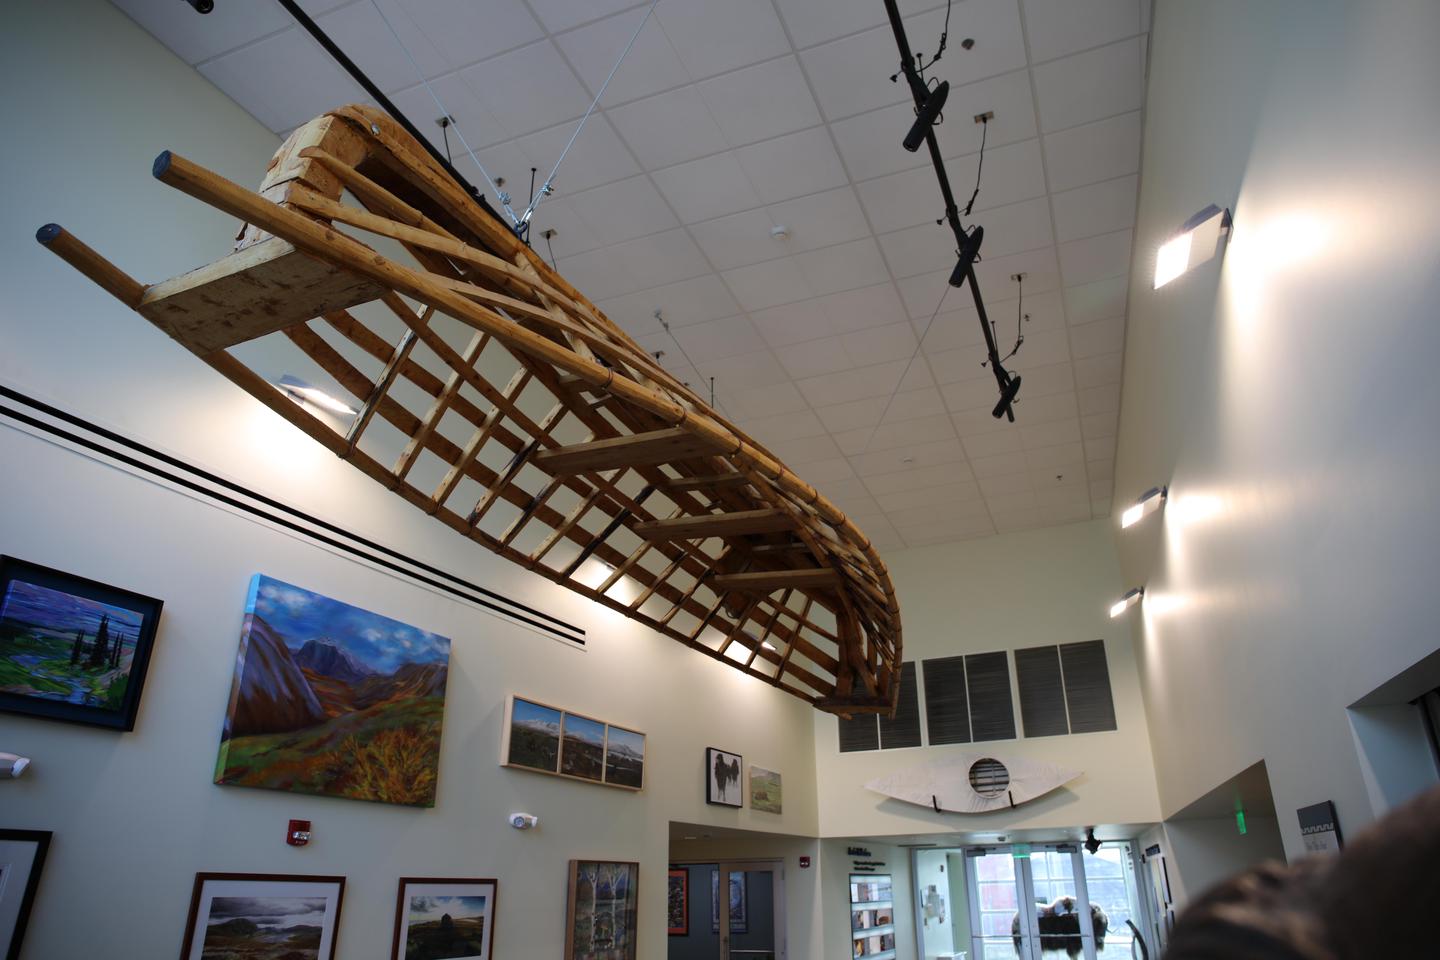 Umiaq and artwork at the Heritage CenterDisplays include traditional a tradition umiaq and artwork created through the Artists-in-Residence Program